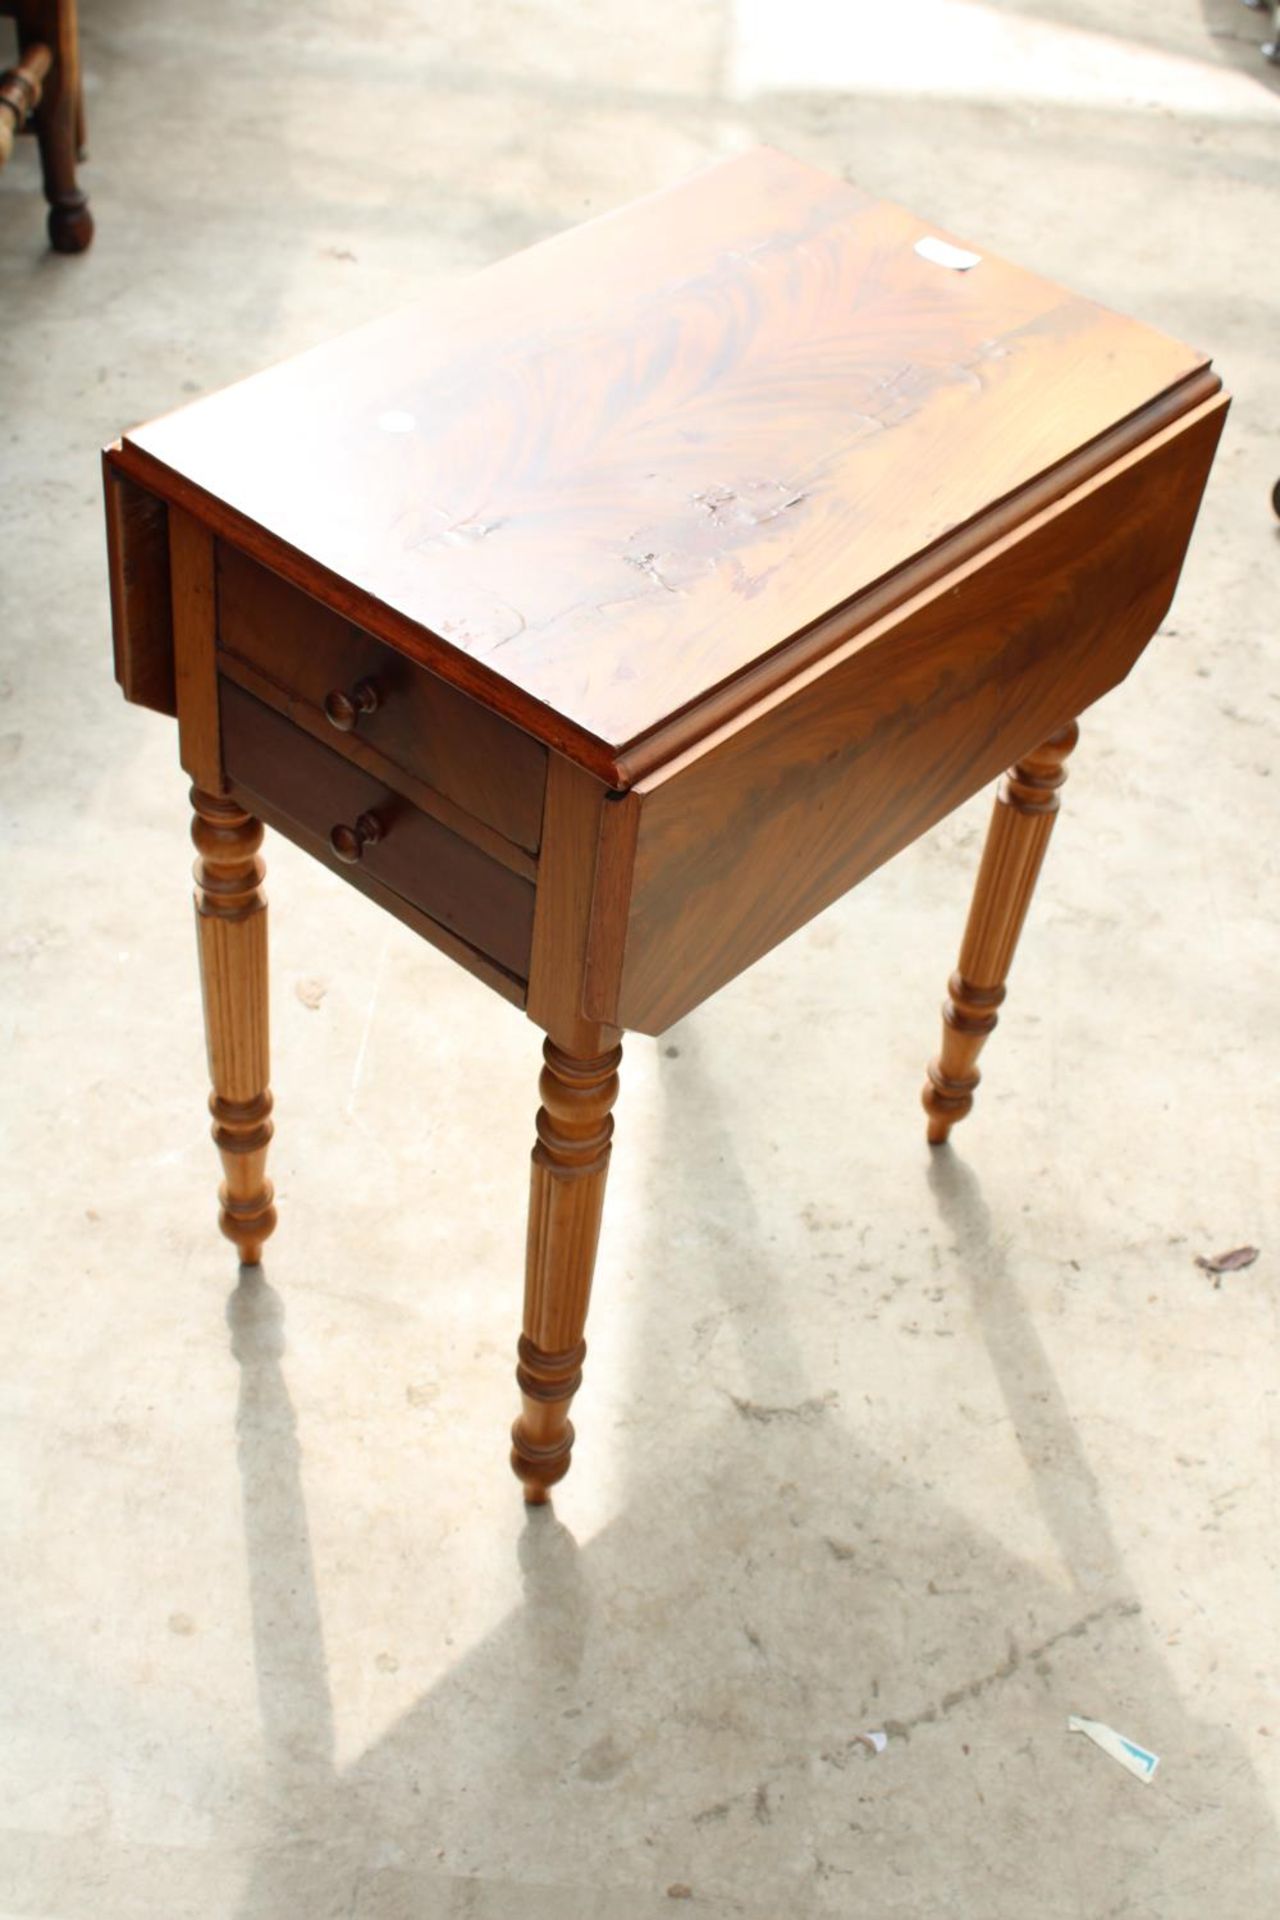 A 19TH CENTURY MAHOGANY WORK TABLE WITH 2 DRAWERS, SIDE CUPBOARD AND WORK BOX - Bild 2 aus 5